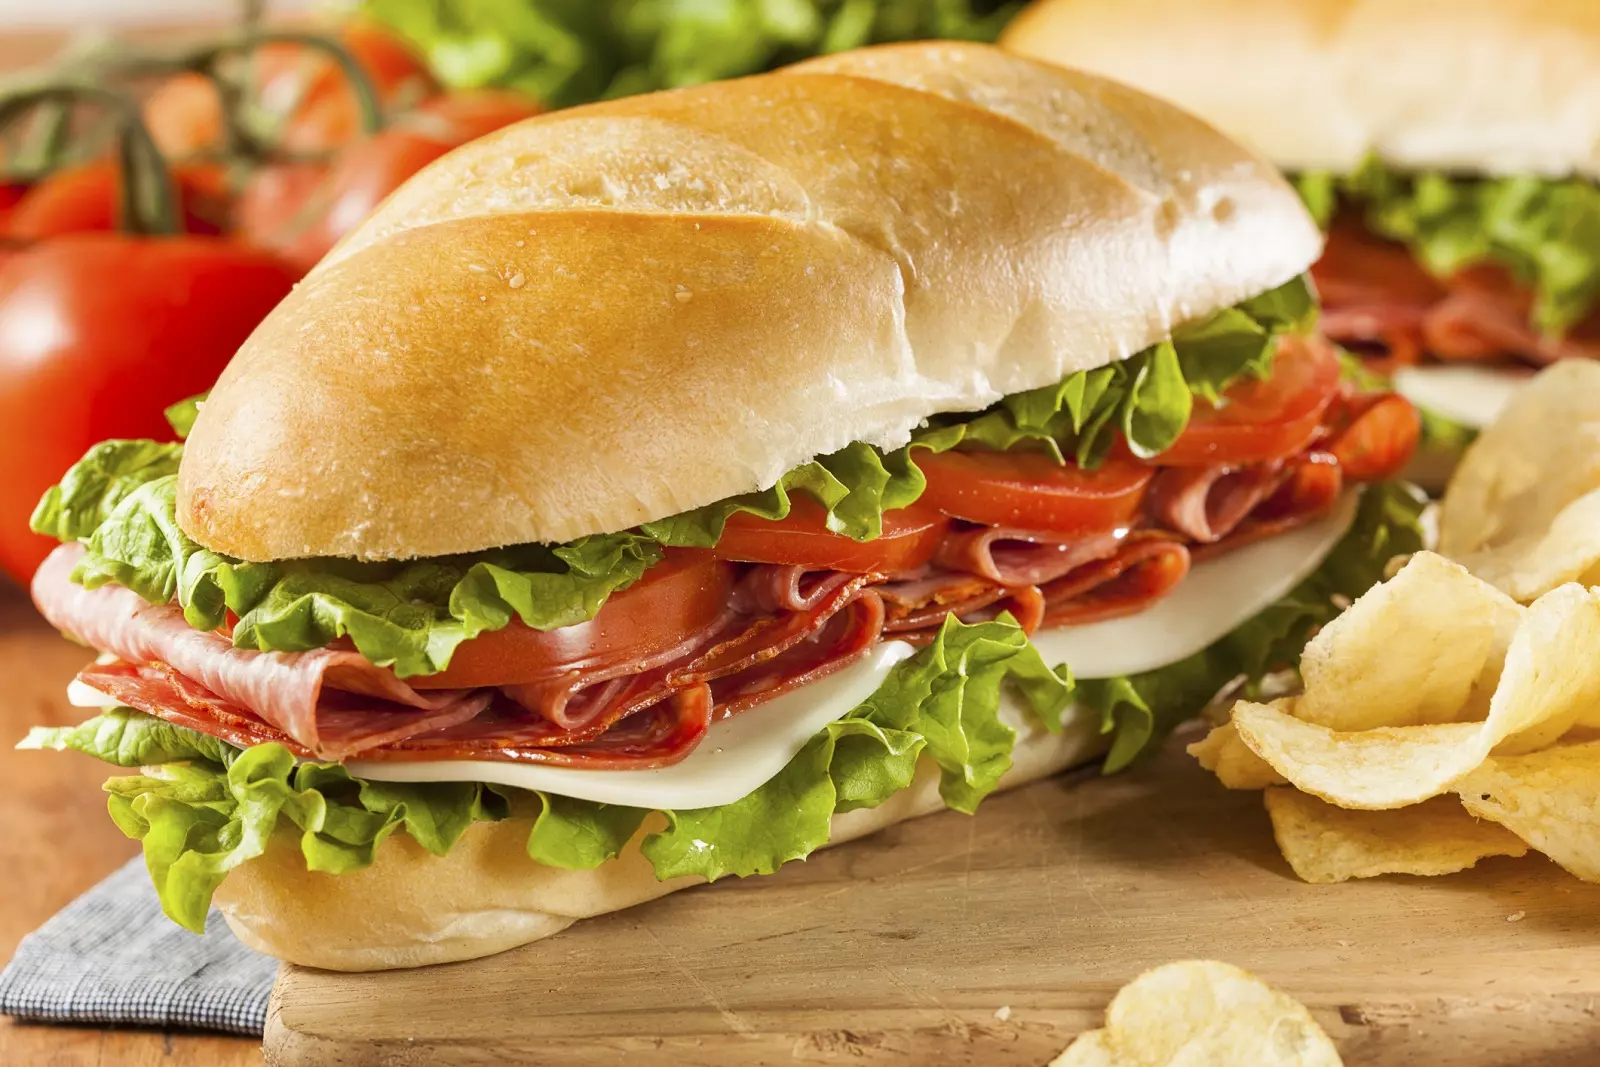 10-facts-about-national-hoagie-day-may-5th